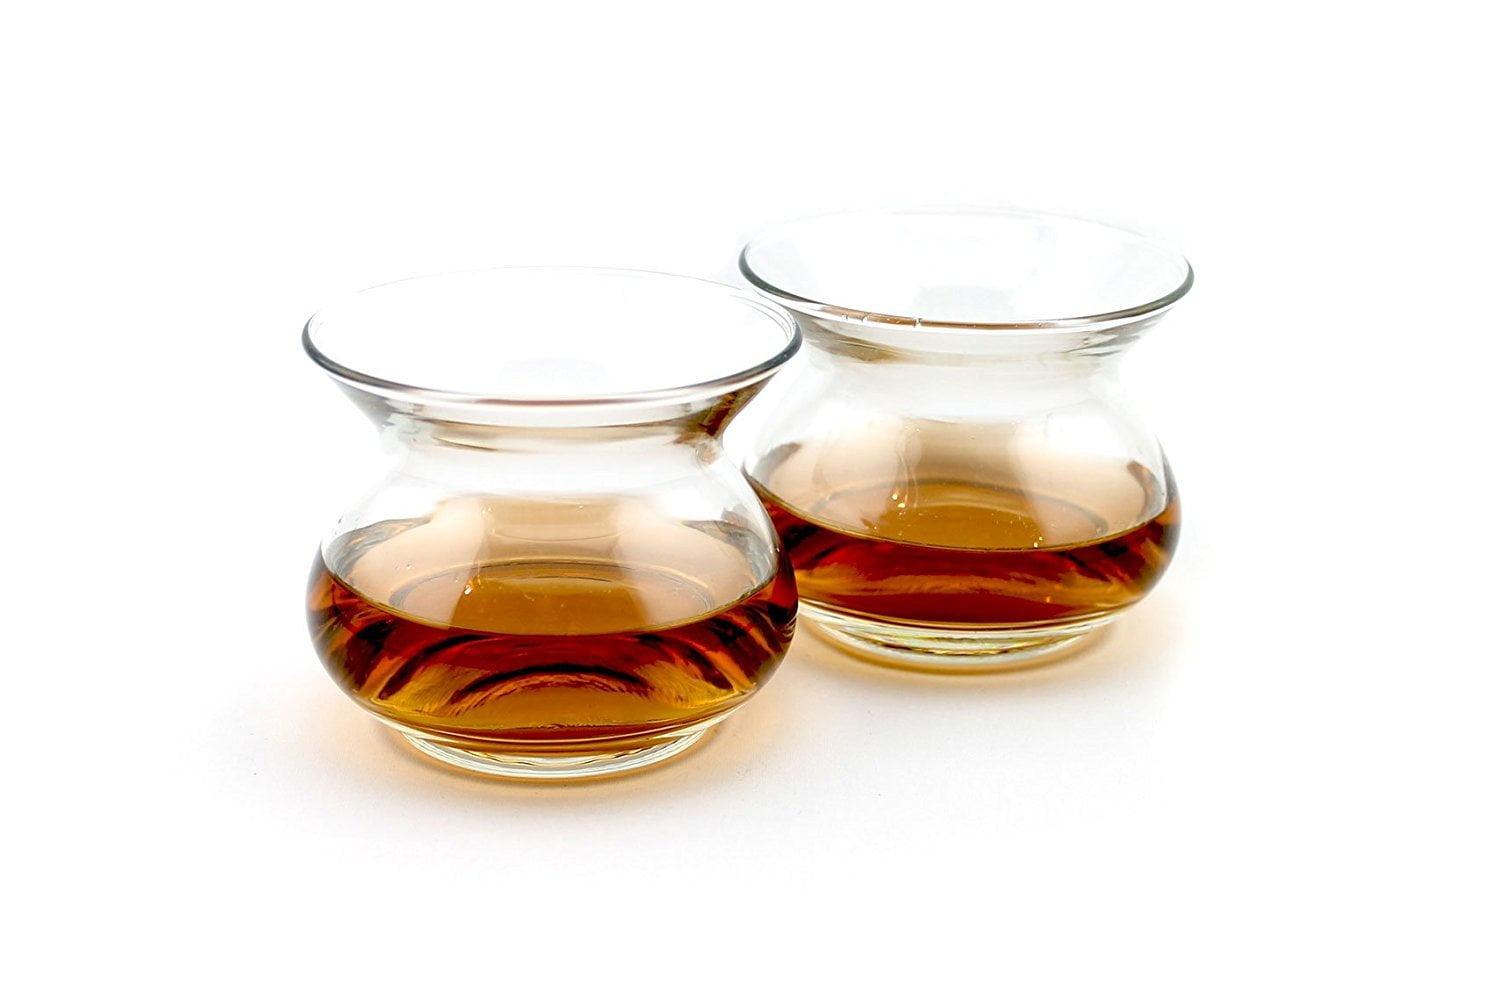 Set of 2 by The Neat Glass Whiskey Tasting Ultimate Spirits Glass 